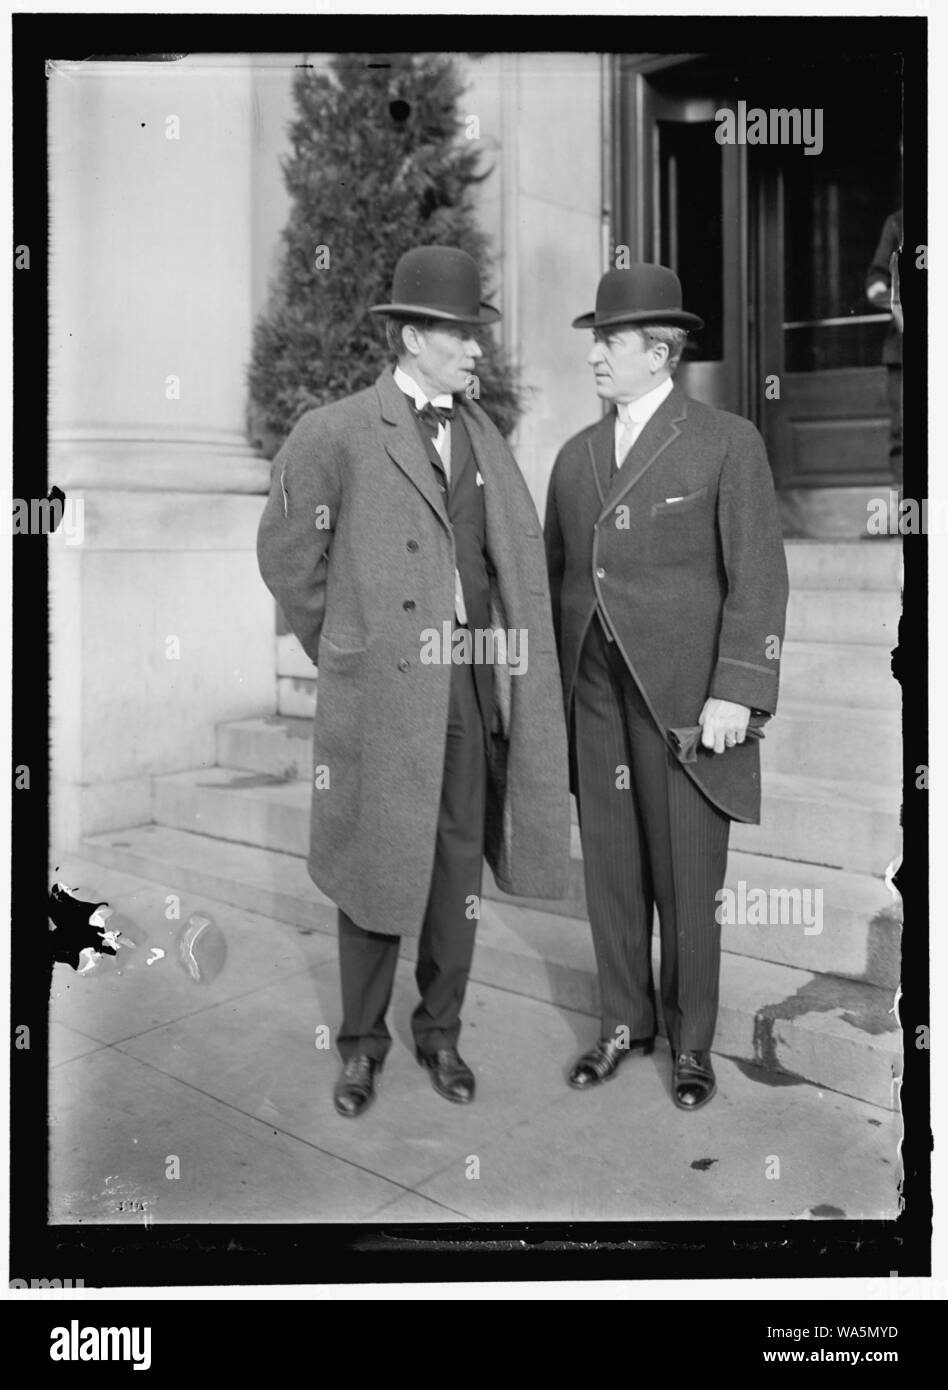 DIX, JOHN A. GOVERNOR OF NEW YORK, 1910-1912. RIGHT, WITH SULZER Stock Photo